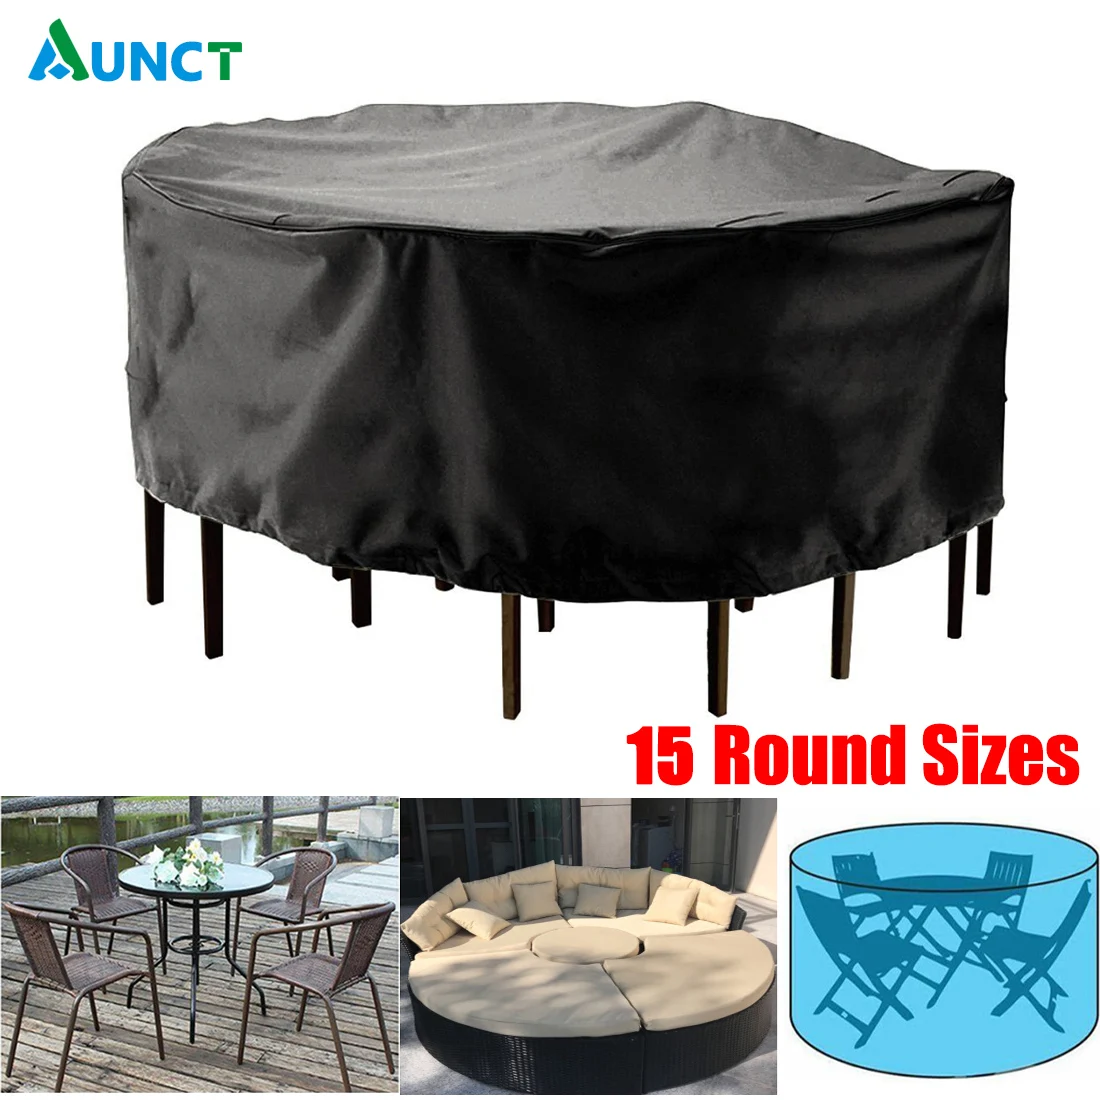 15 Sizes Outdoor Garden Furniture Cover Round Table Chair Set Waterproof Oxford Wicker Sofa Protect Patio Rain Snow Dust Covers images - 6